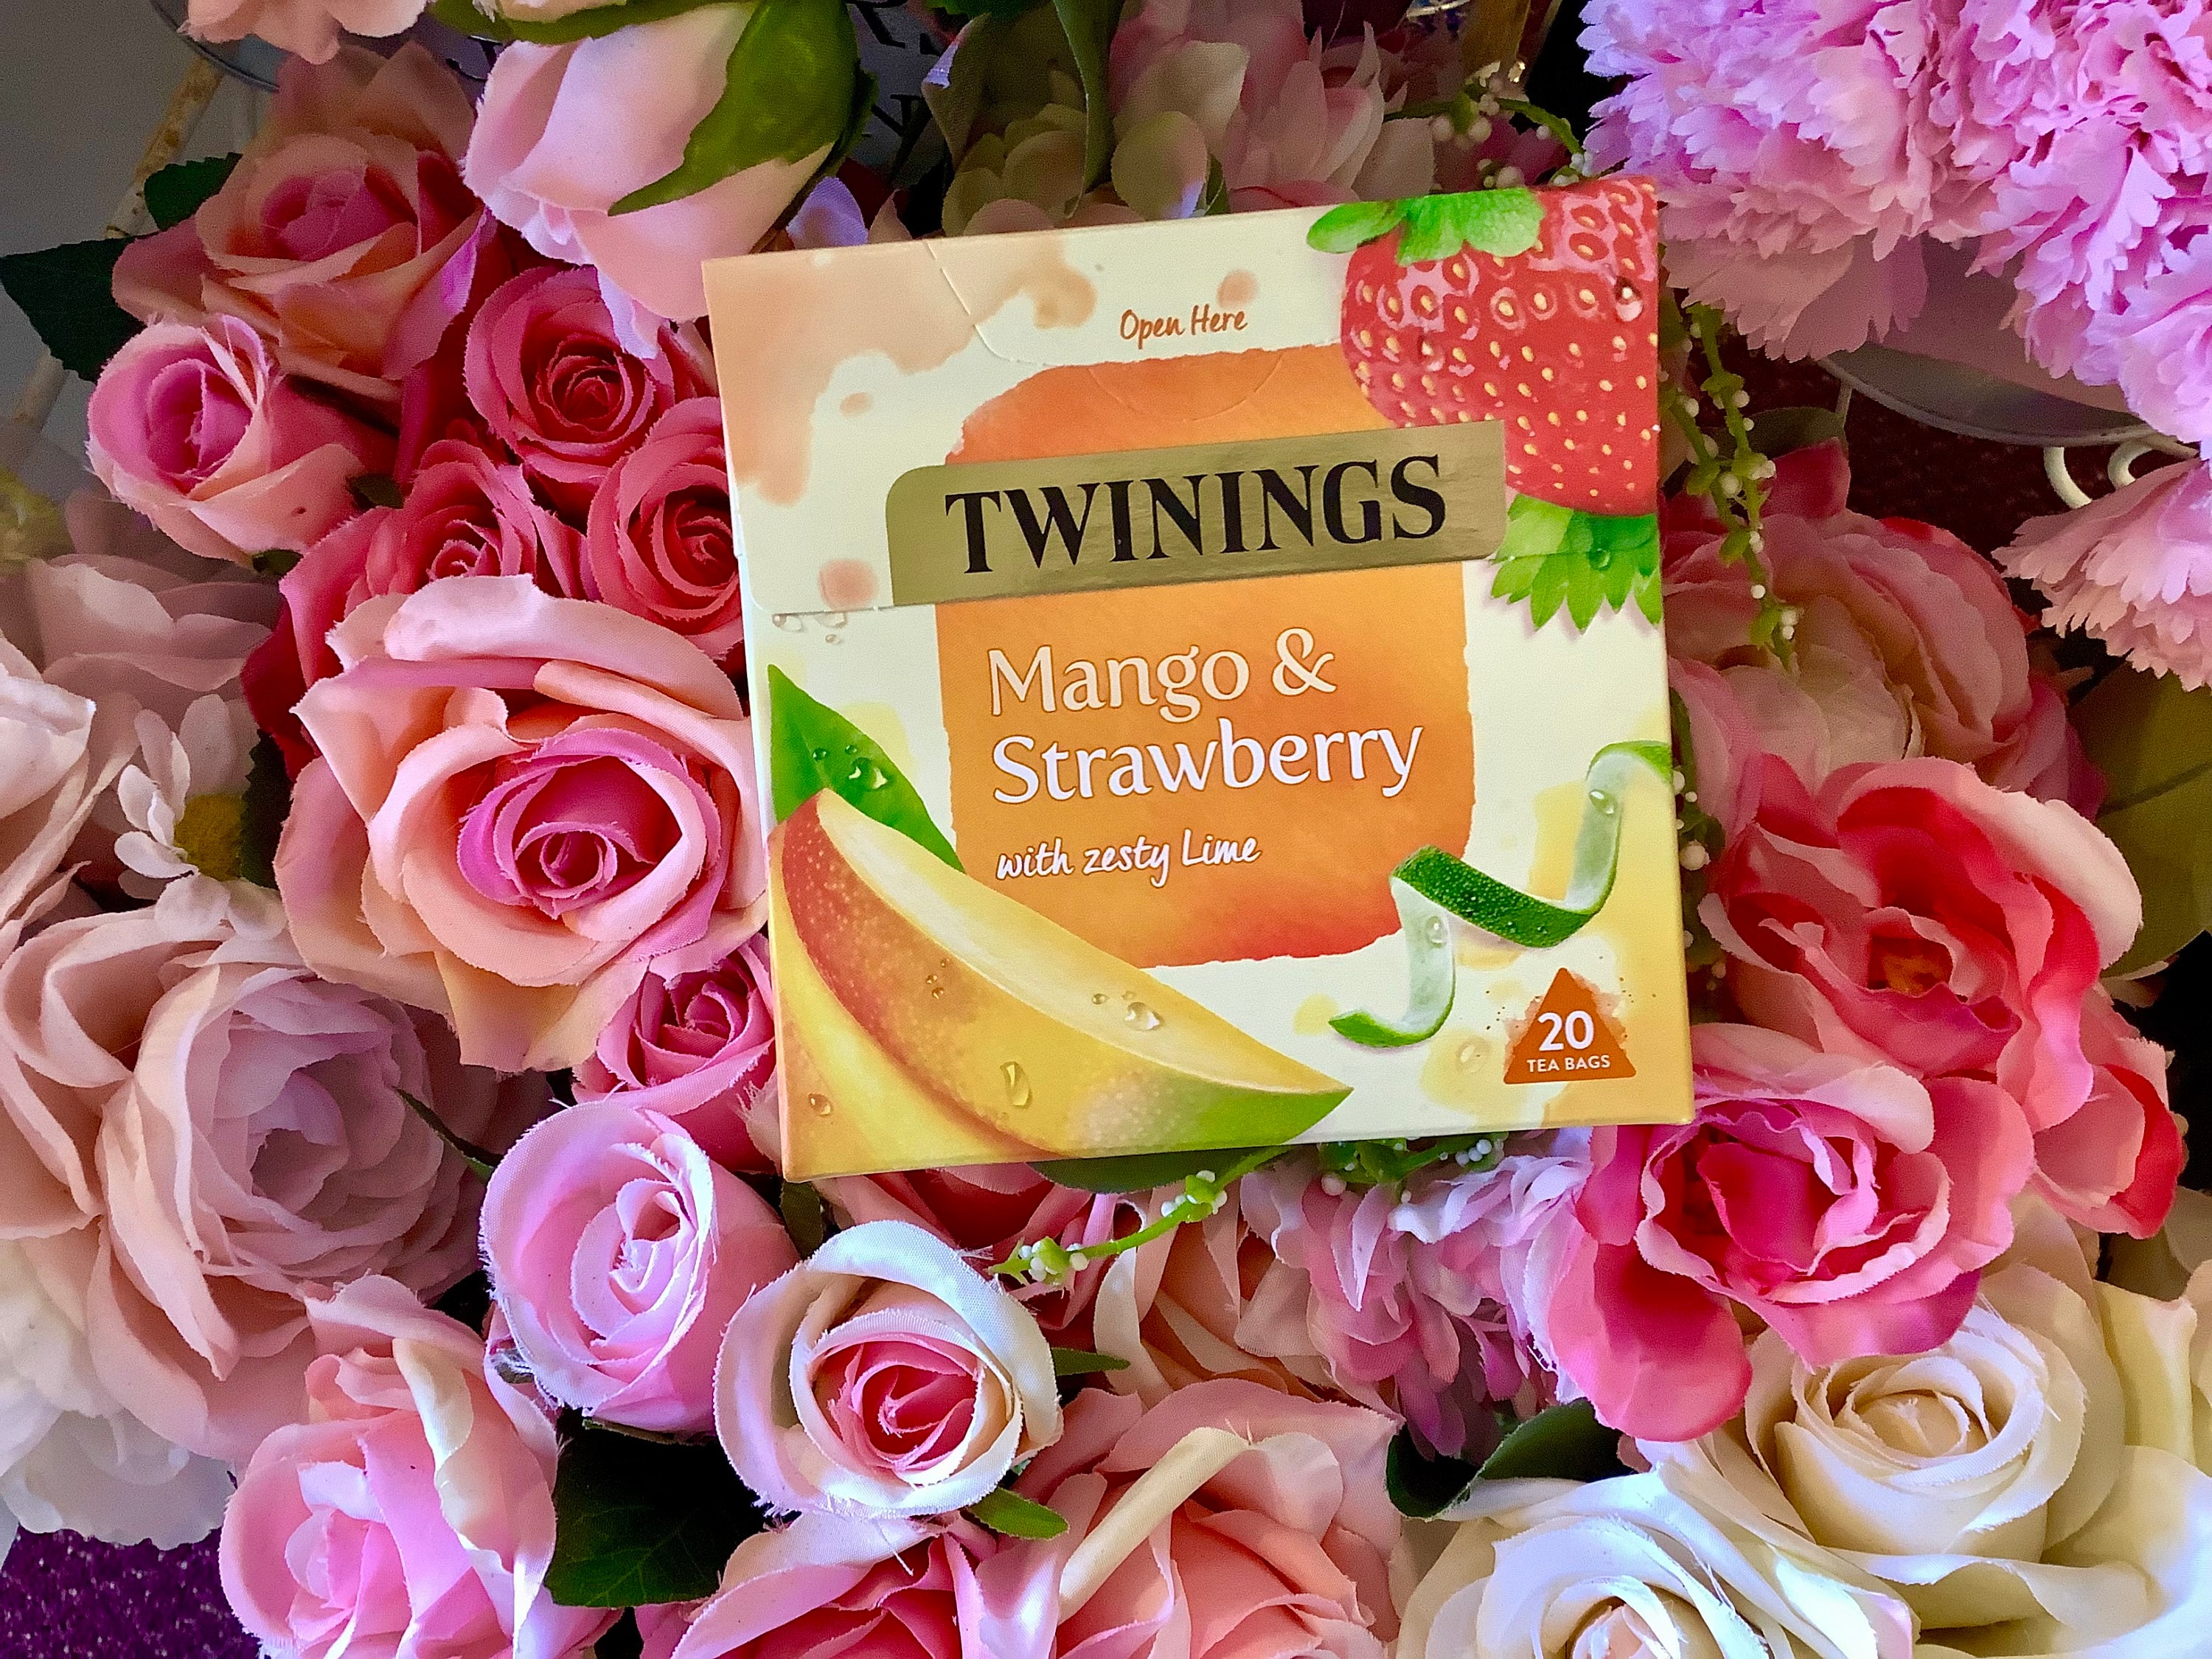 Tea. Twinings From England. Mango & Strawberry With Zesty Lime. Box 20 Pyramid Teabags. Gift For Tea Lovers, Tea Party Hostess